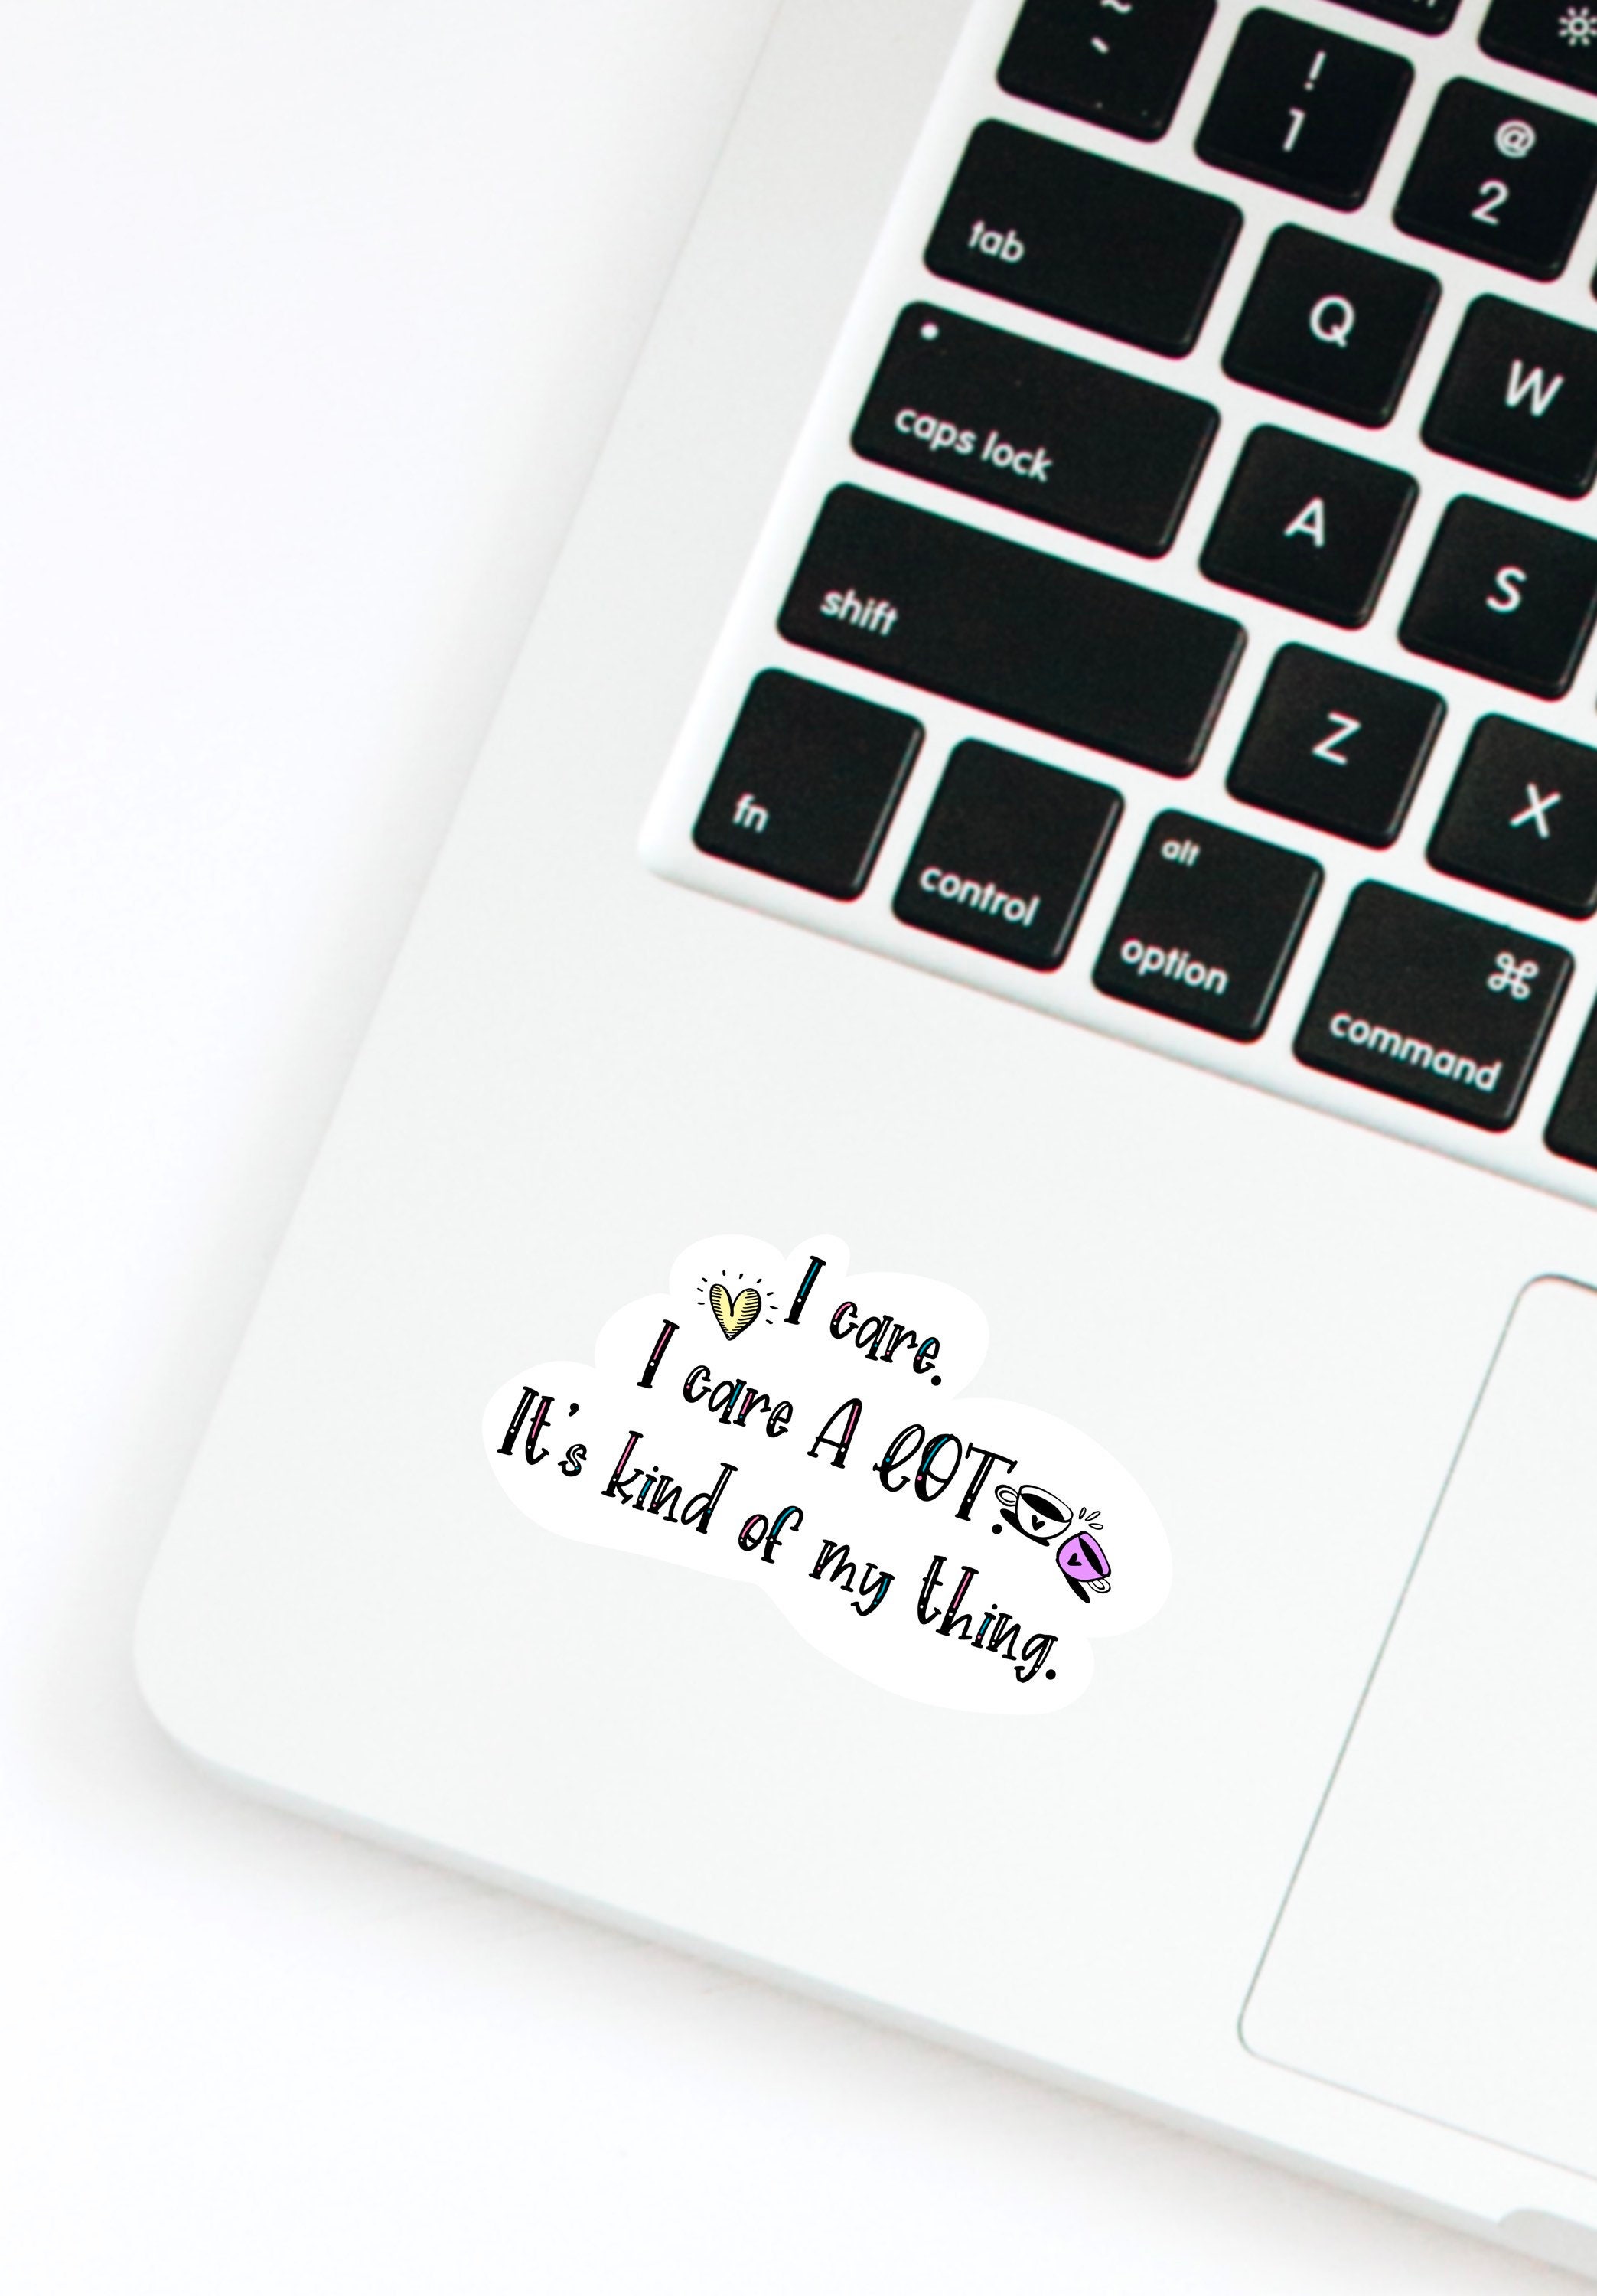 Parks and Rec Funny Sticker people caring loudly at me Laptop Sticker Macbook Decal TV175 Friend Gift Leslie Knope quote Coworker Gift